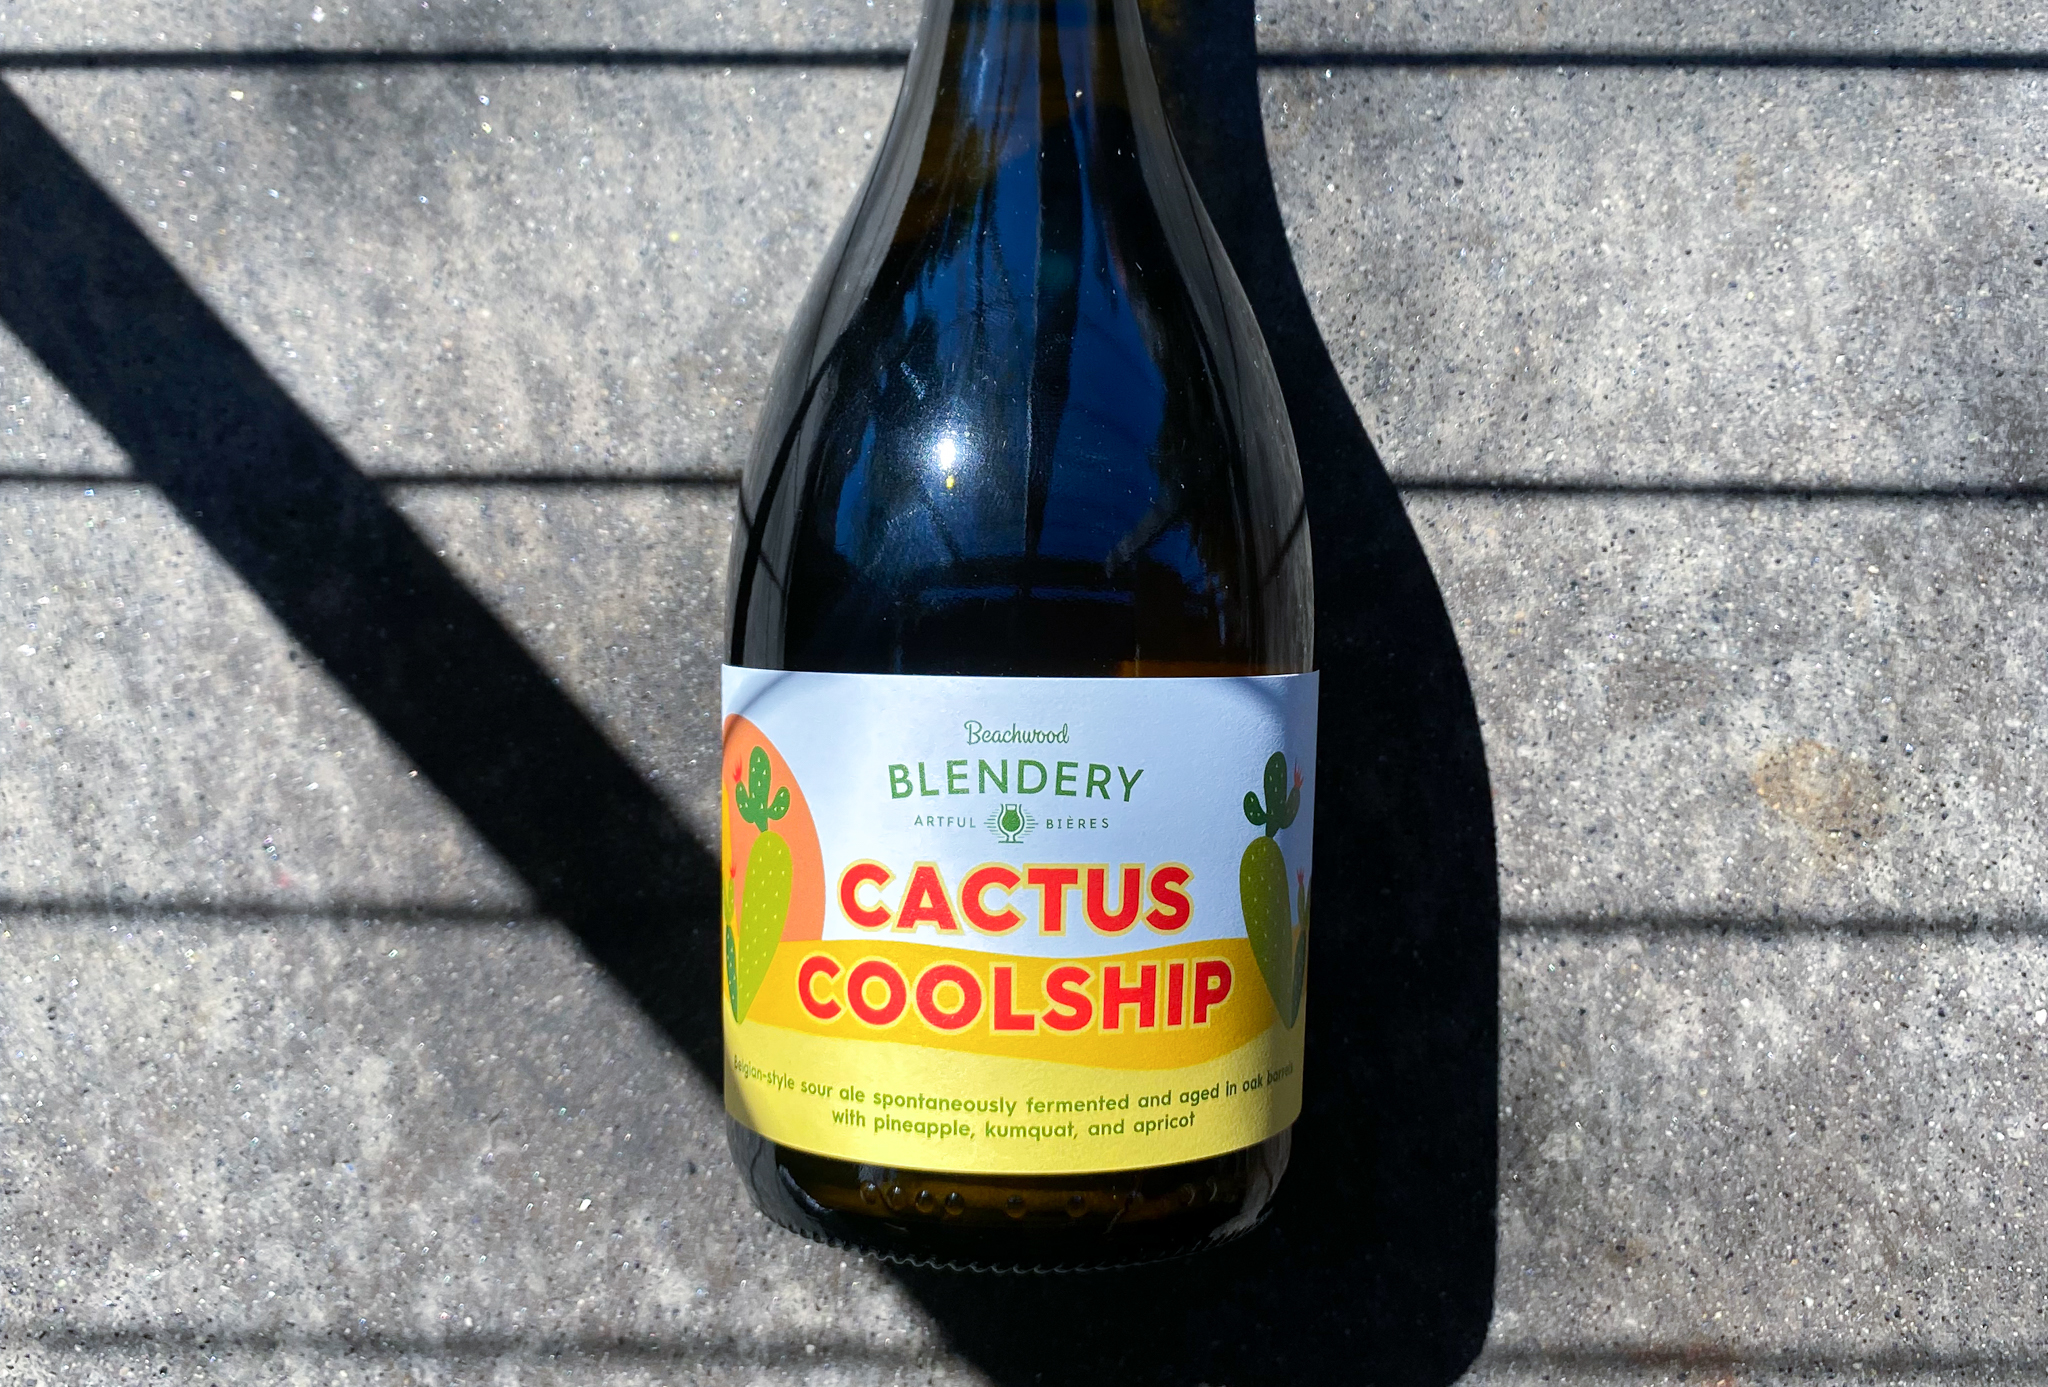 Cactus Coolship now available